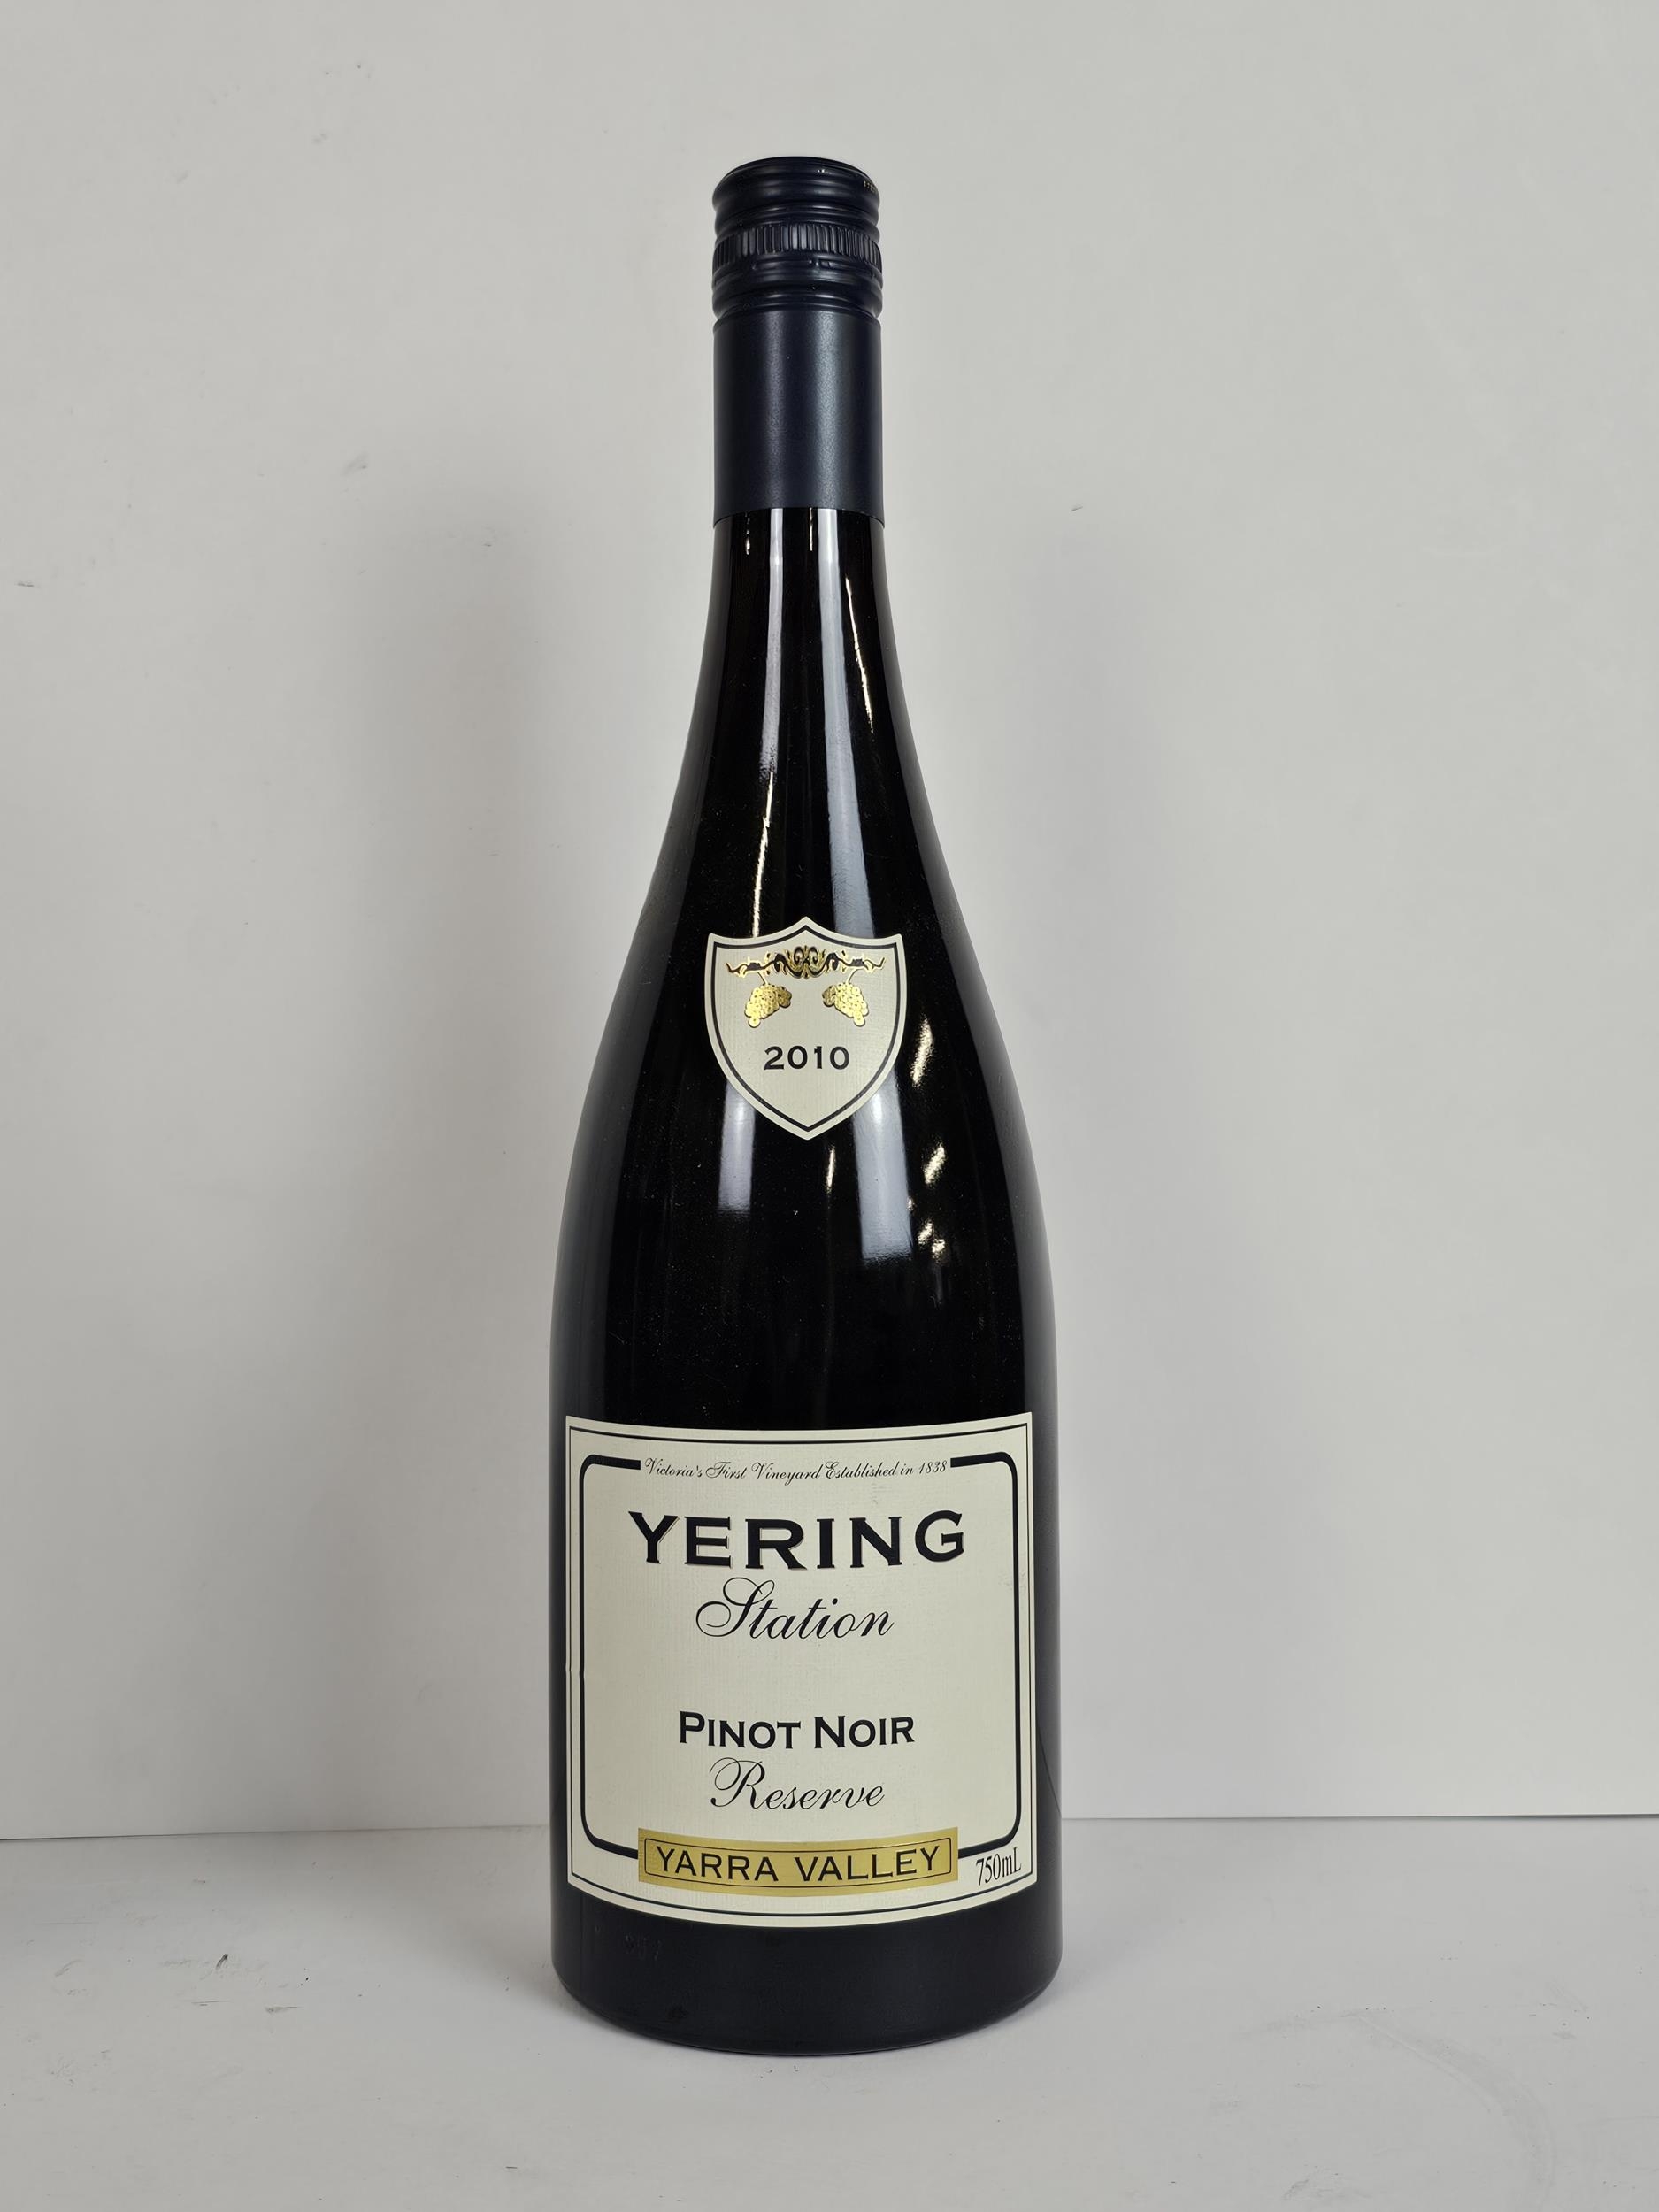 A bottle of 2010 Yering Station Reserve Pinot Noir, Yarra Valley, Australia, 75cl together with a - Image 4 of 4